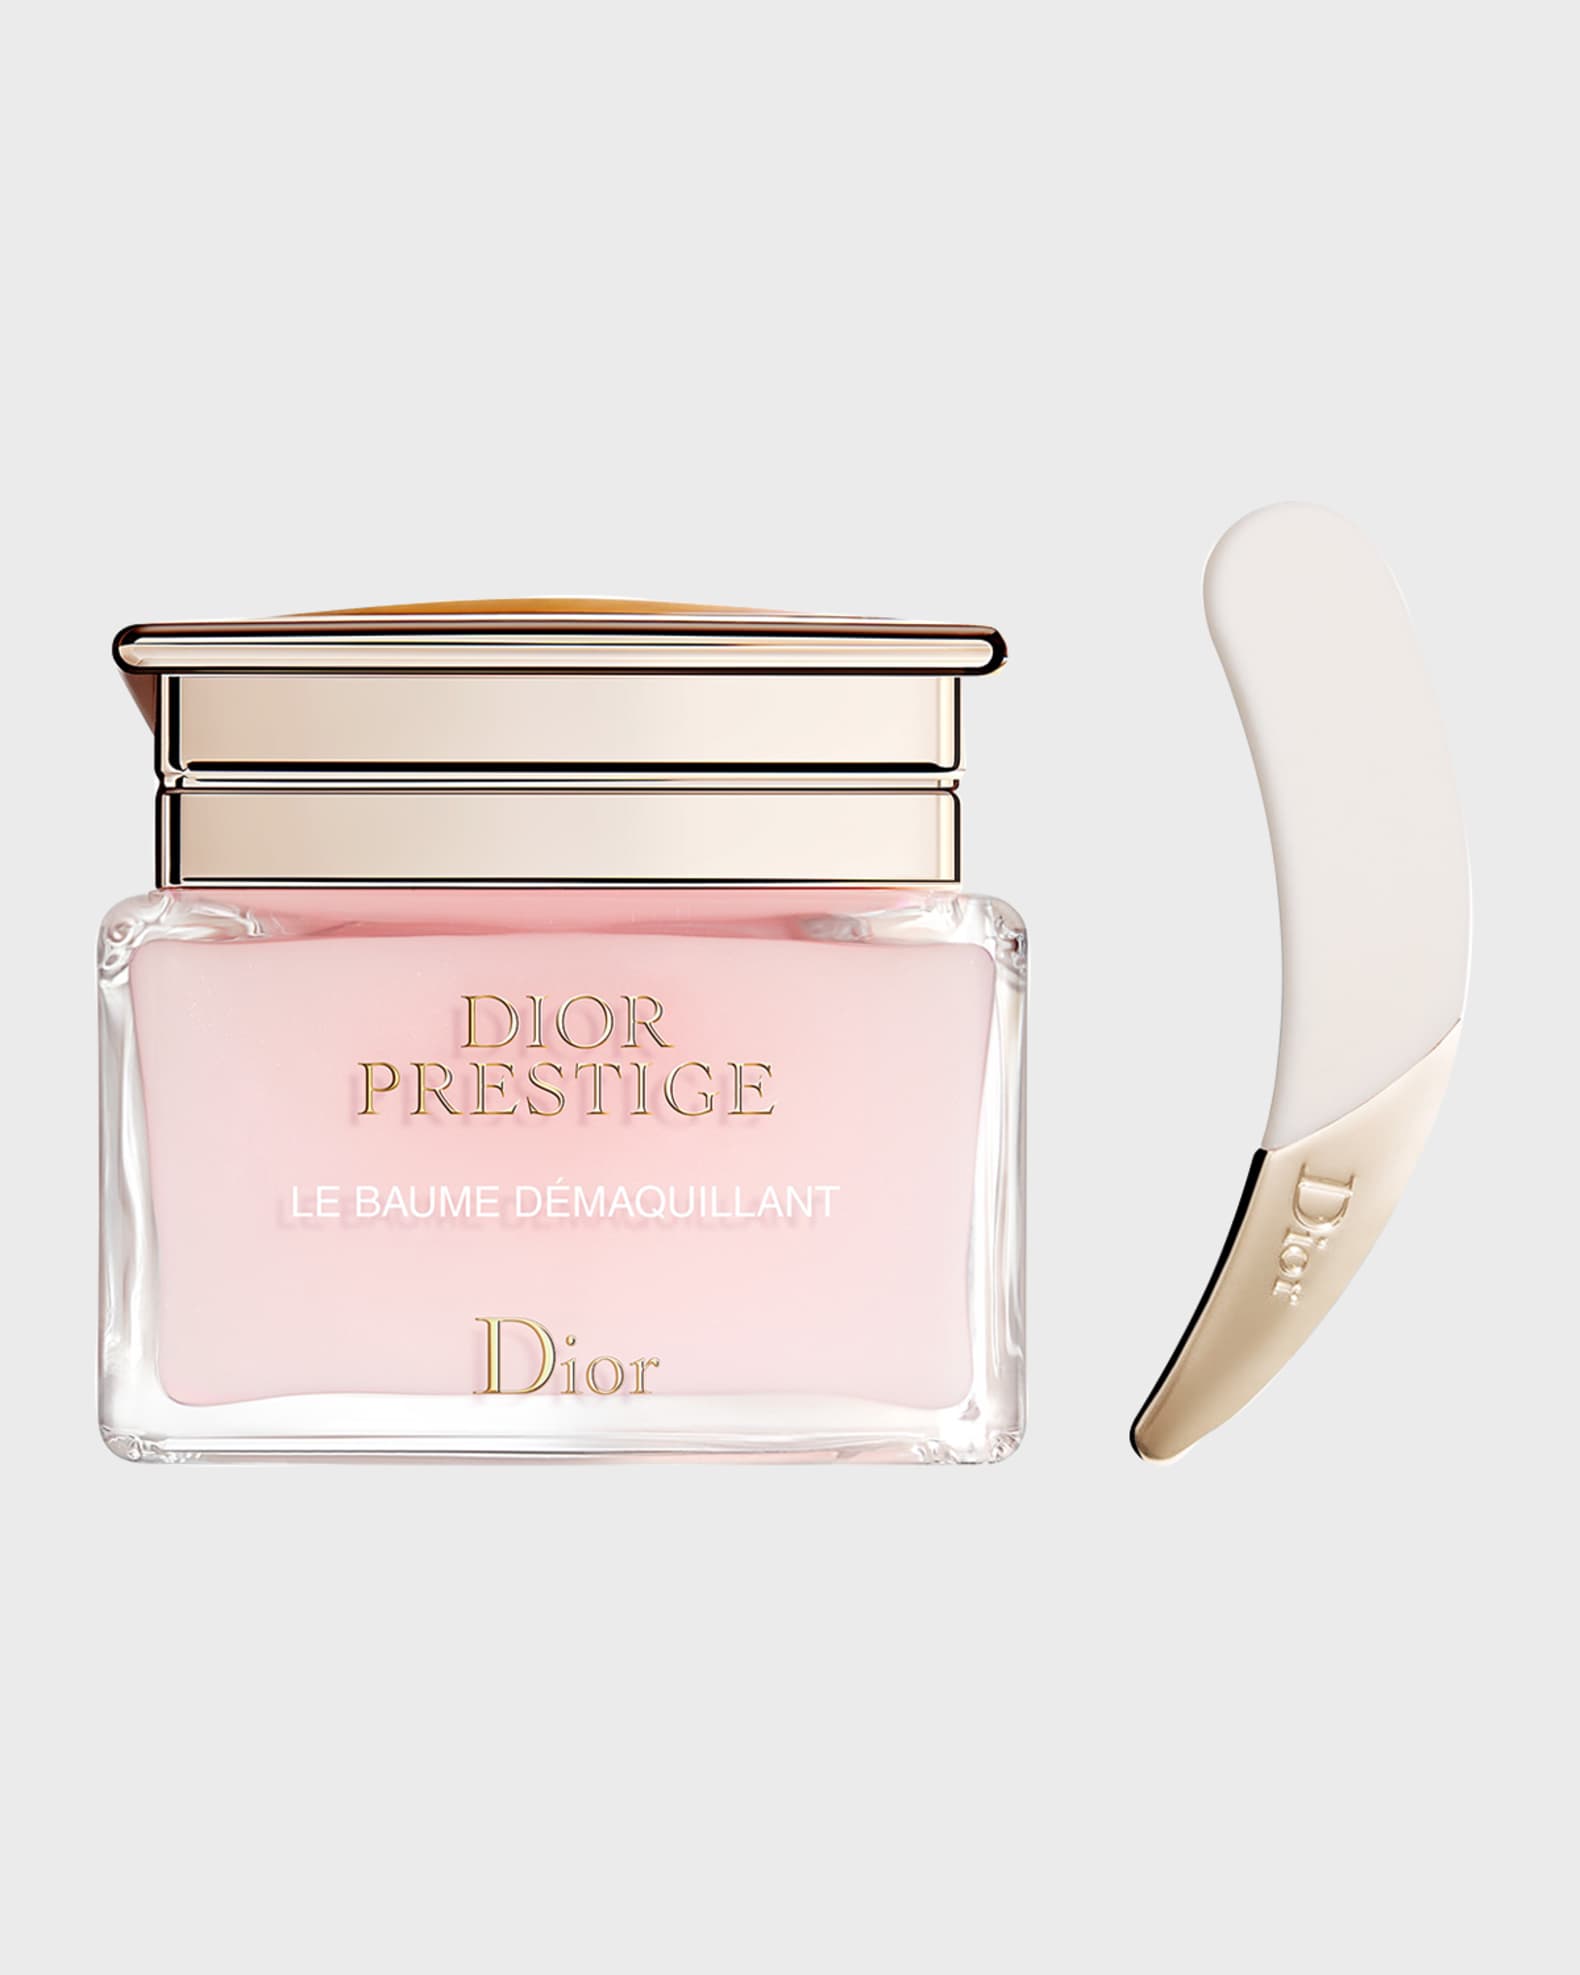 Dior Services: Personalization, Artful Gift Wrapping